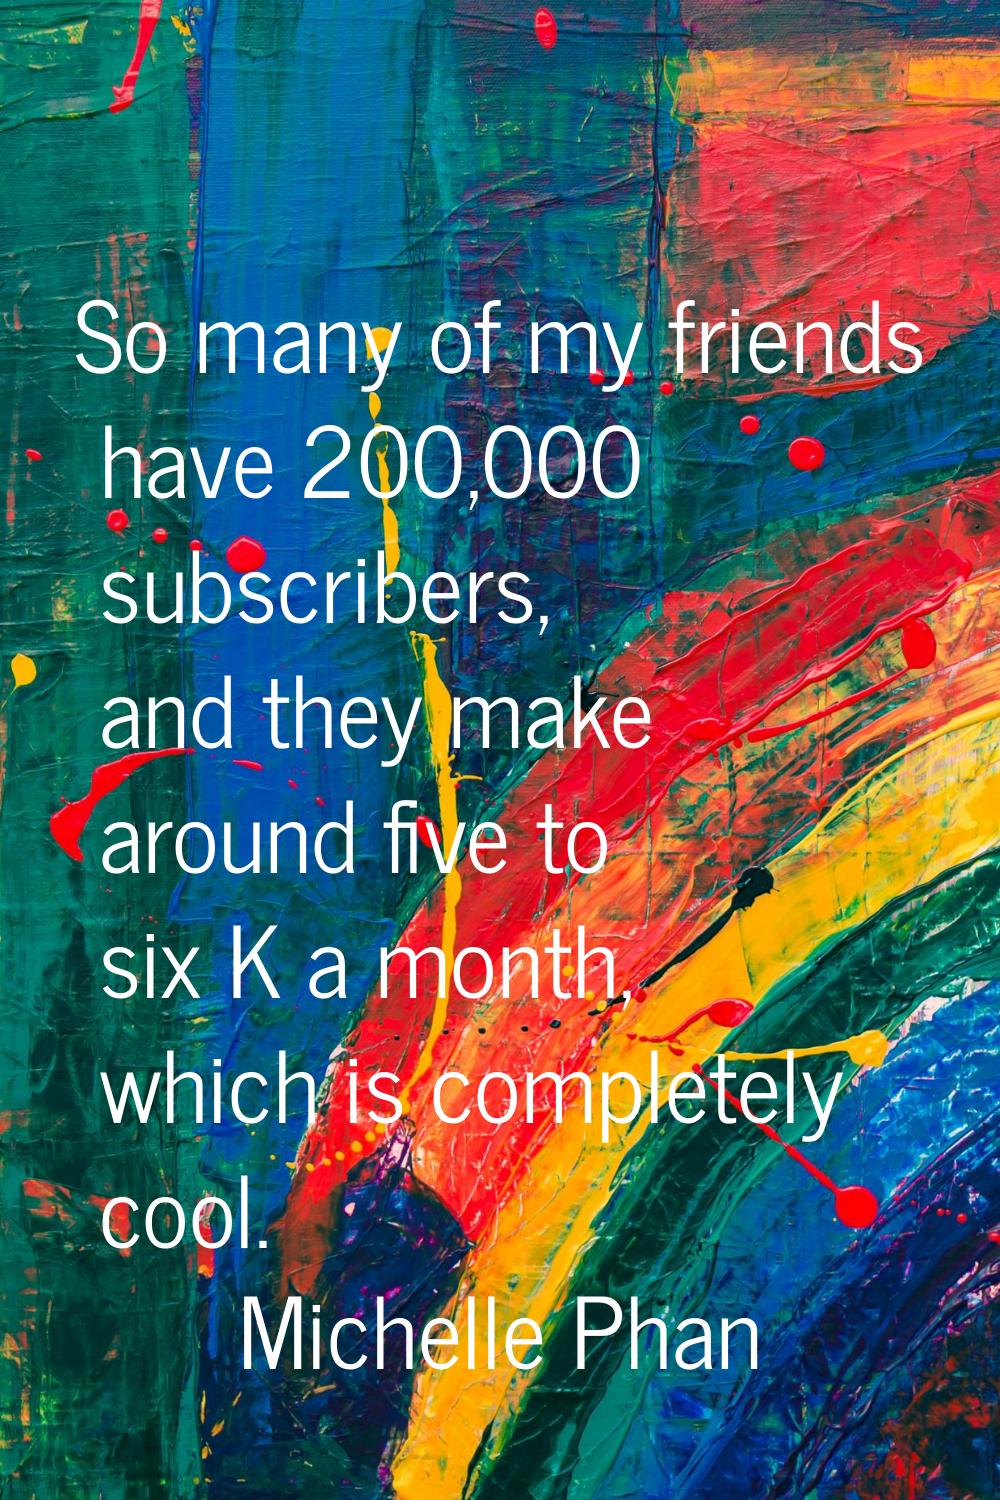 So many of my friends have 200,000 subscribers, and they make around five to six K a month, which i